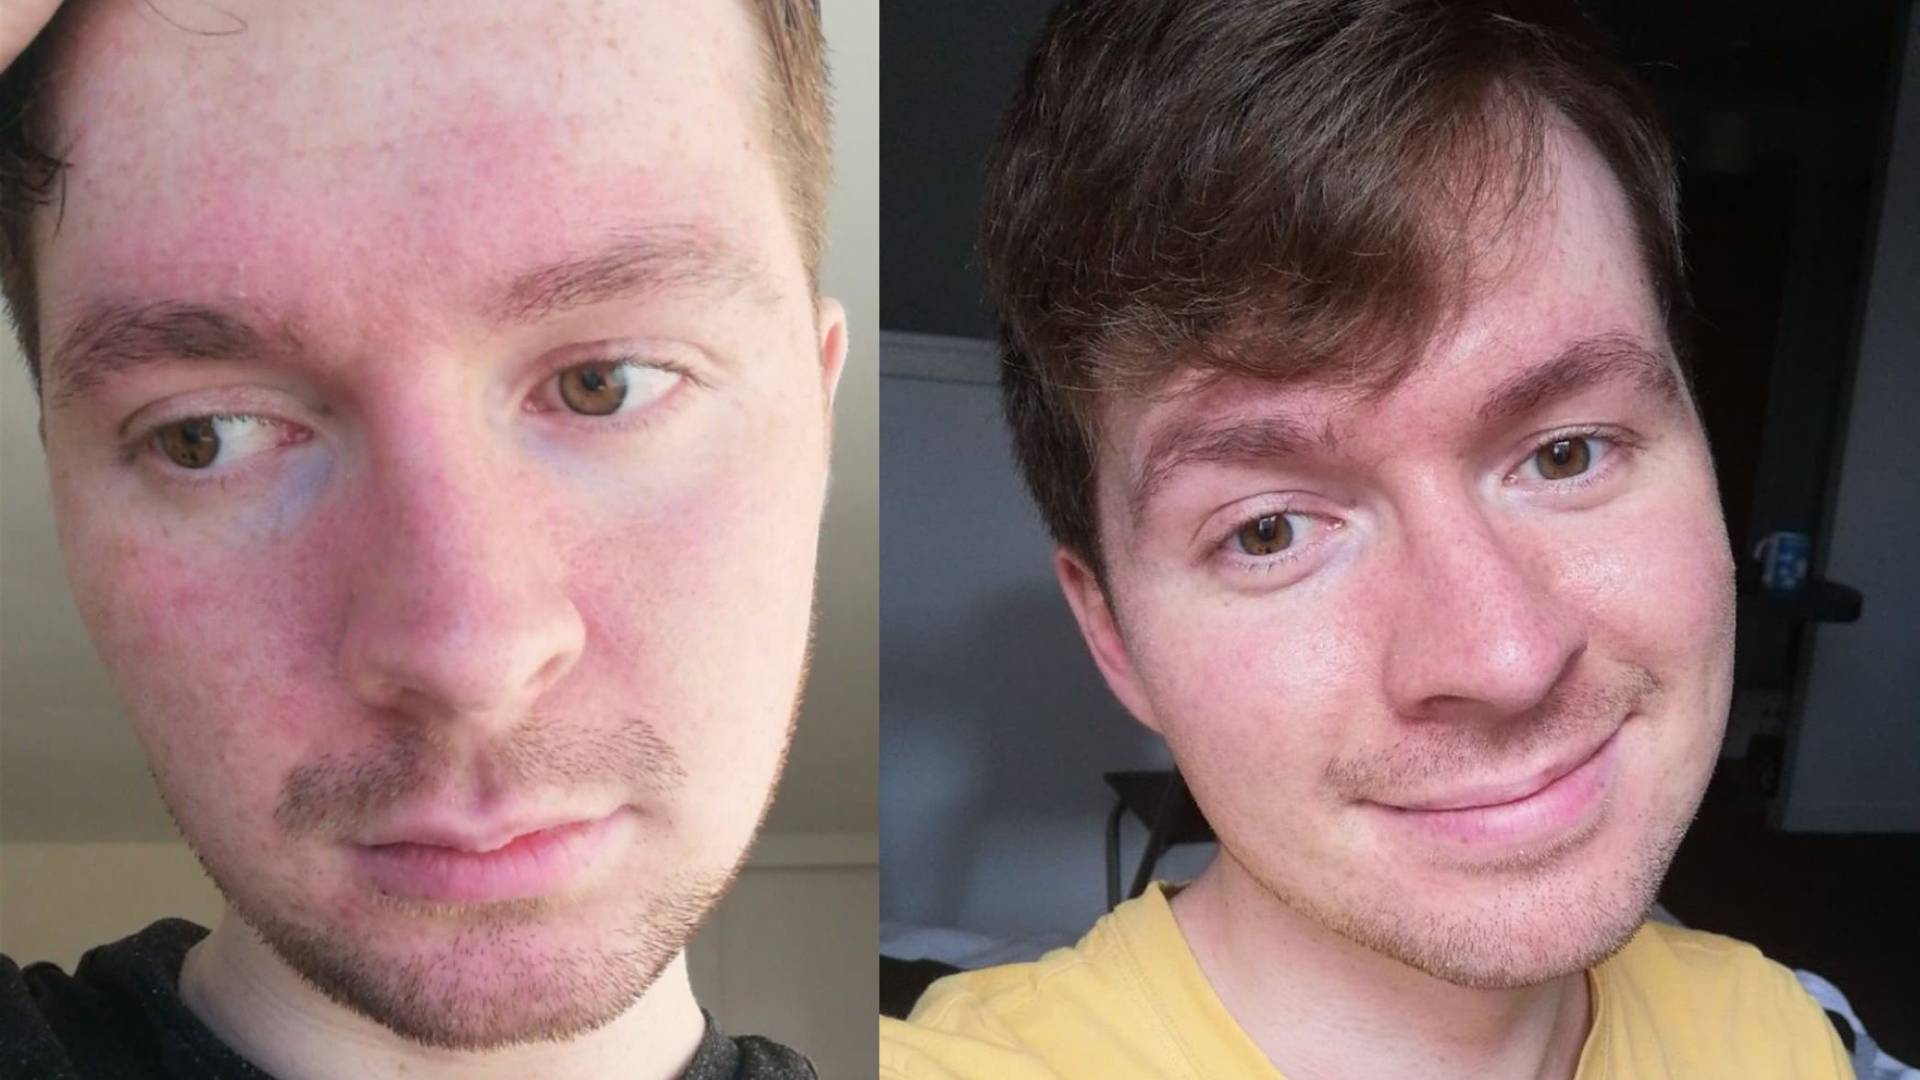 Sam once struggled with the appearance of his seborrheic dermatitis but has learned acceptance